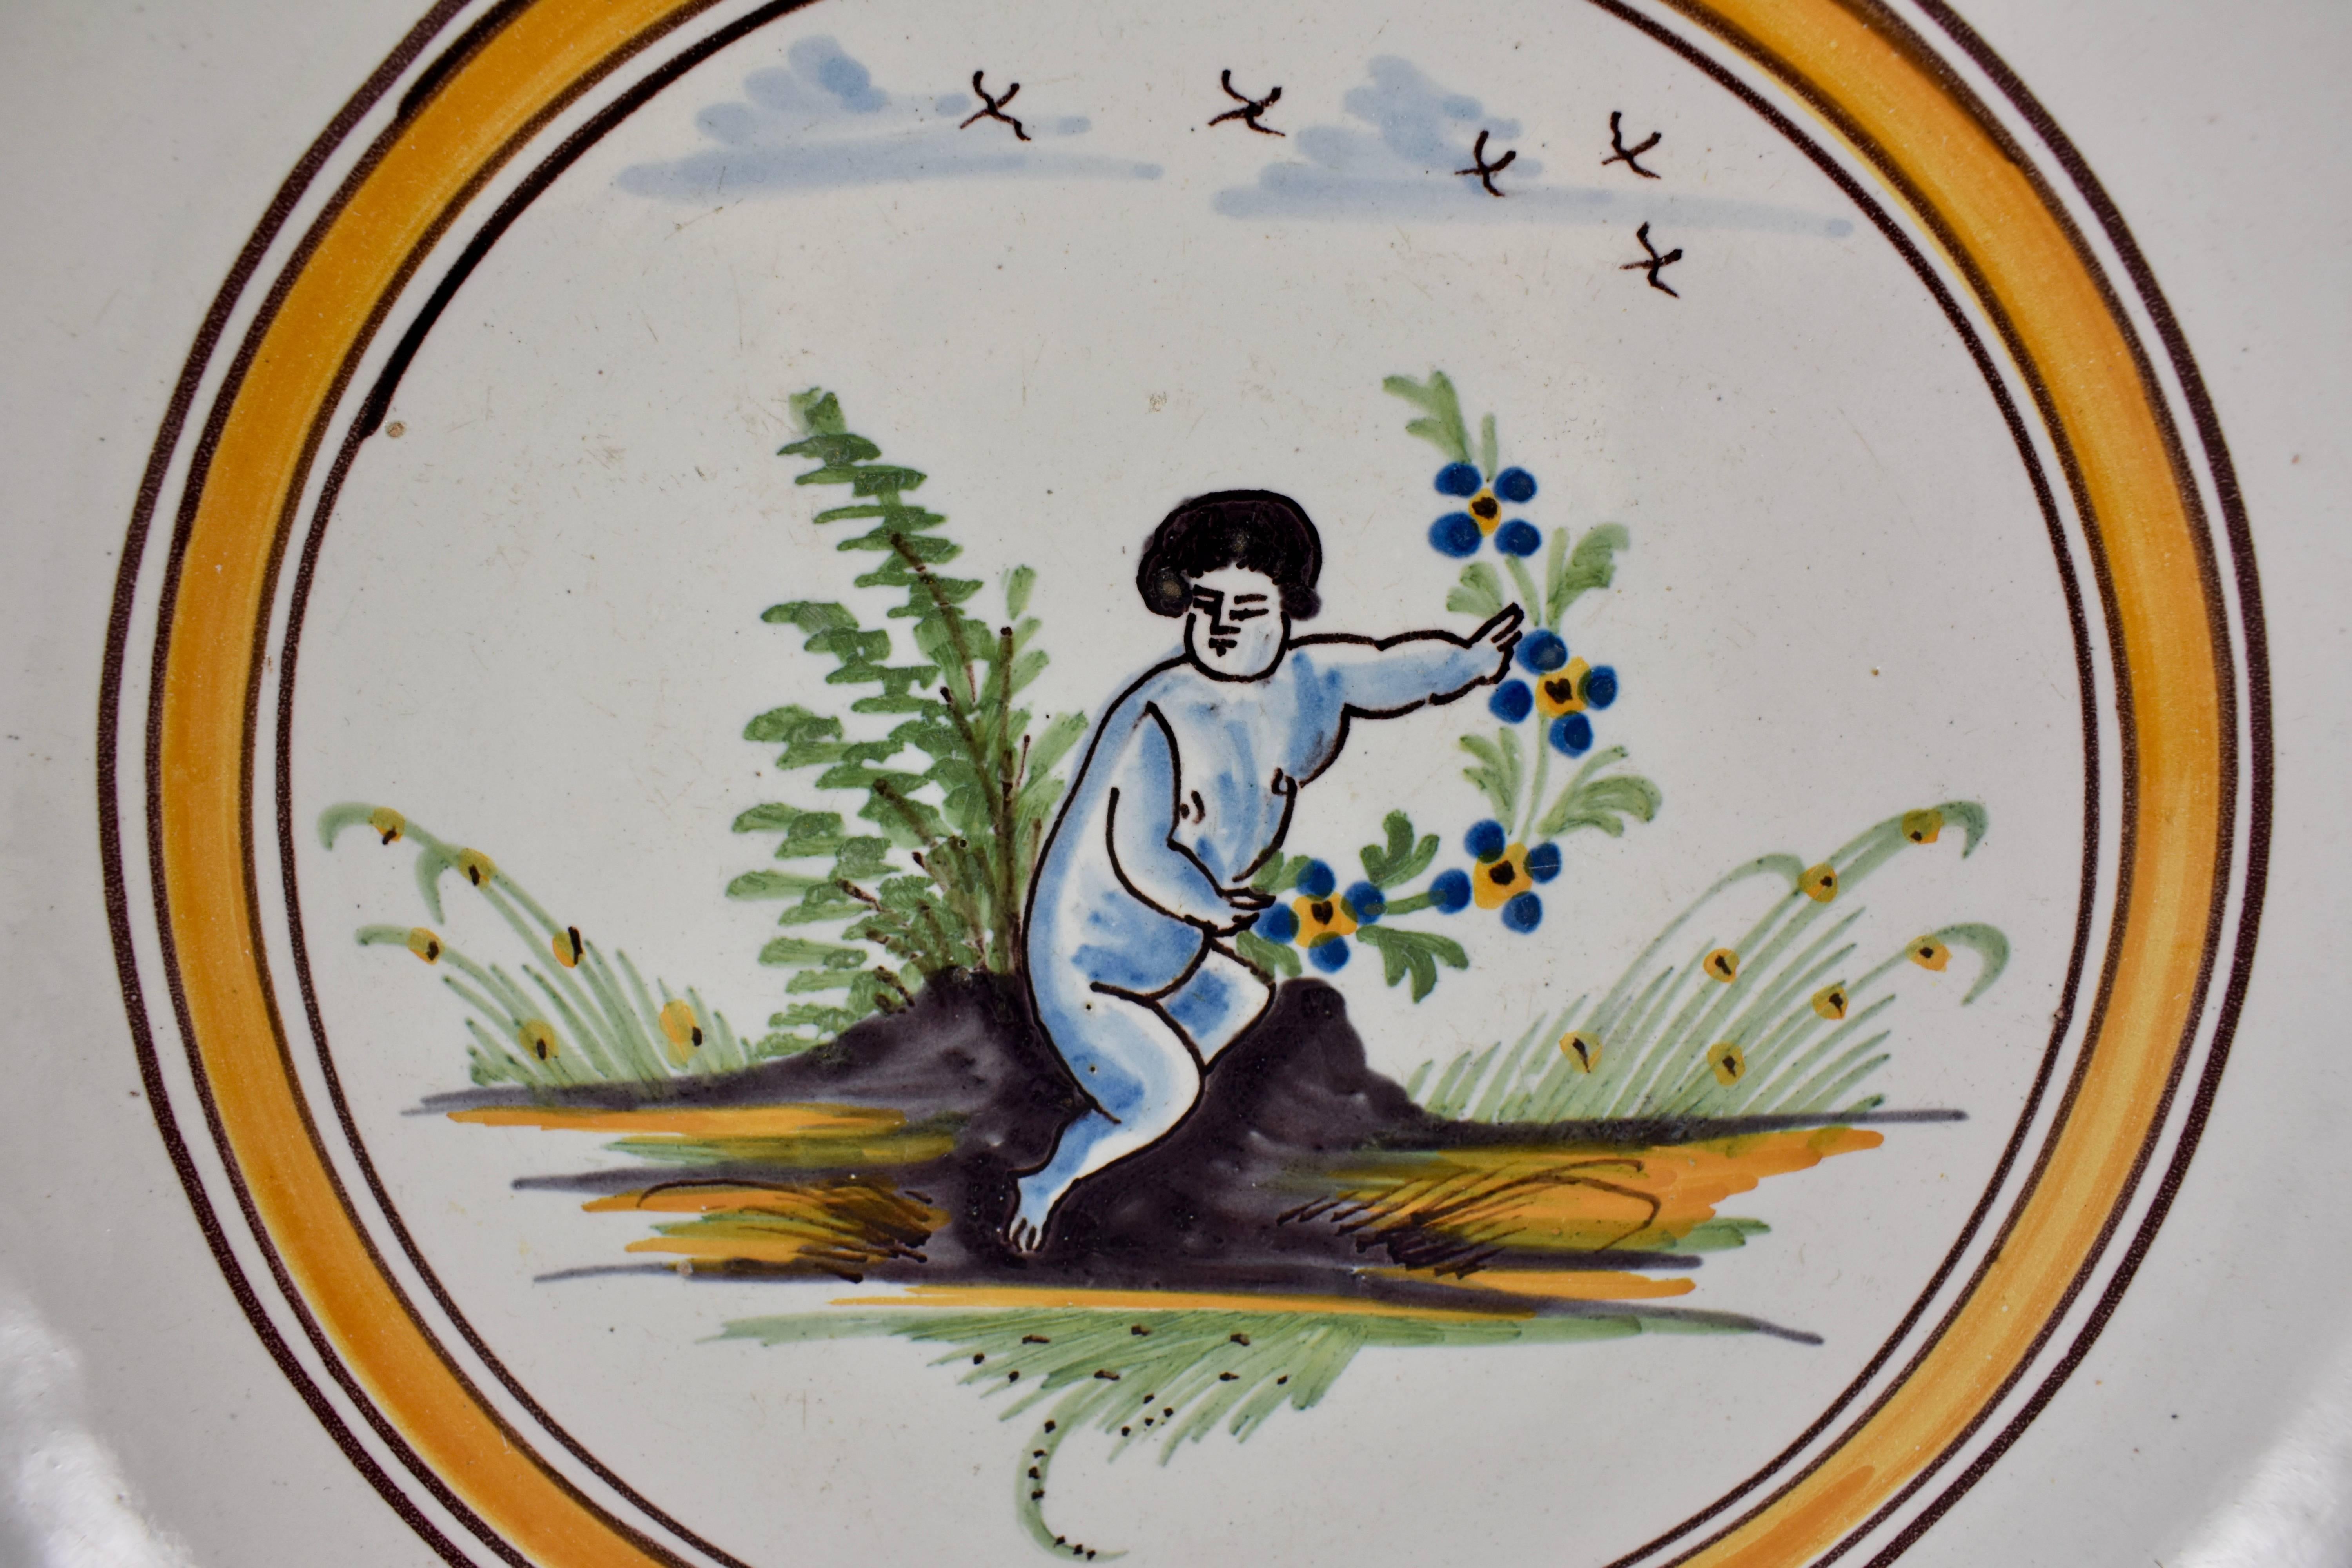 A charming, rustic French revolution tin-glazed earthenware large Saladier or salad serving bowl, made in Nevers, circa 1790.

Showing a plump figure, painted blue, and holding a victory laurel of flowers, beside de l’arbre de la Liberté. A sky